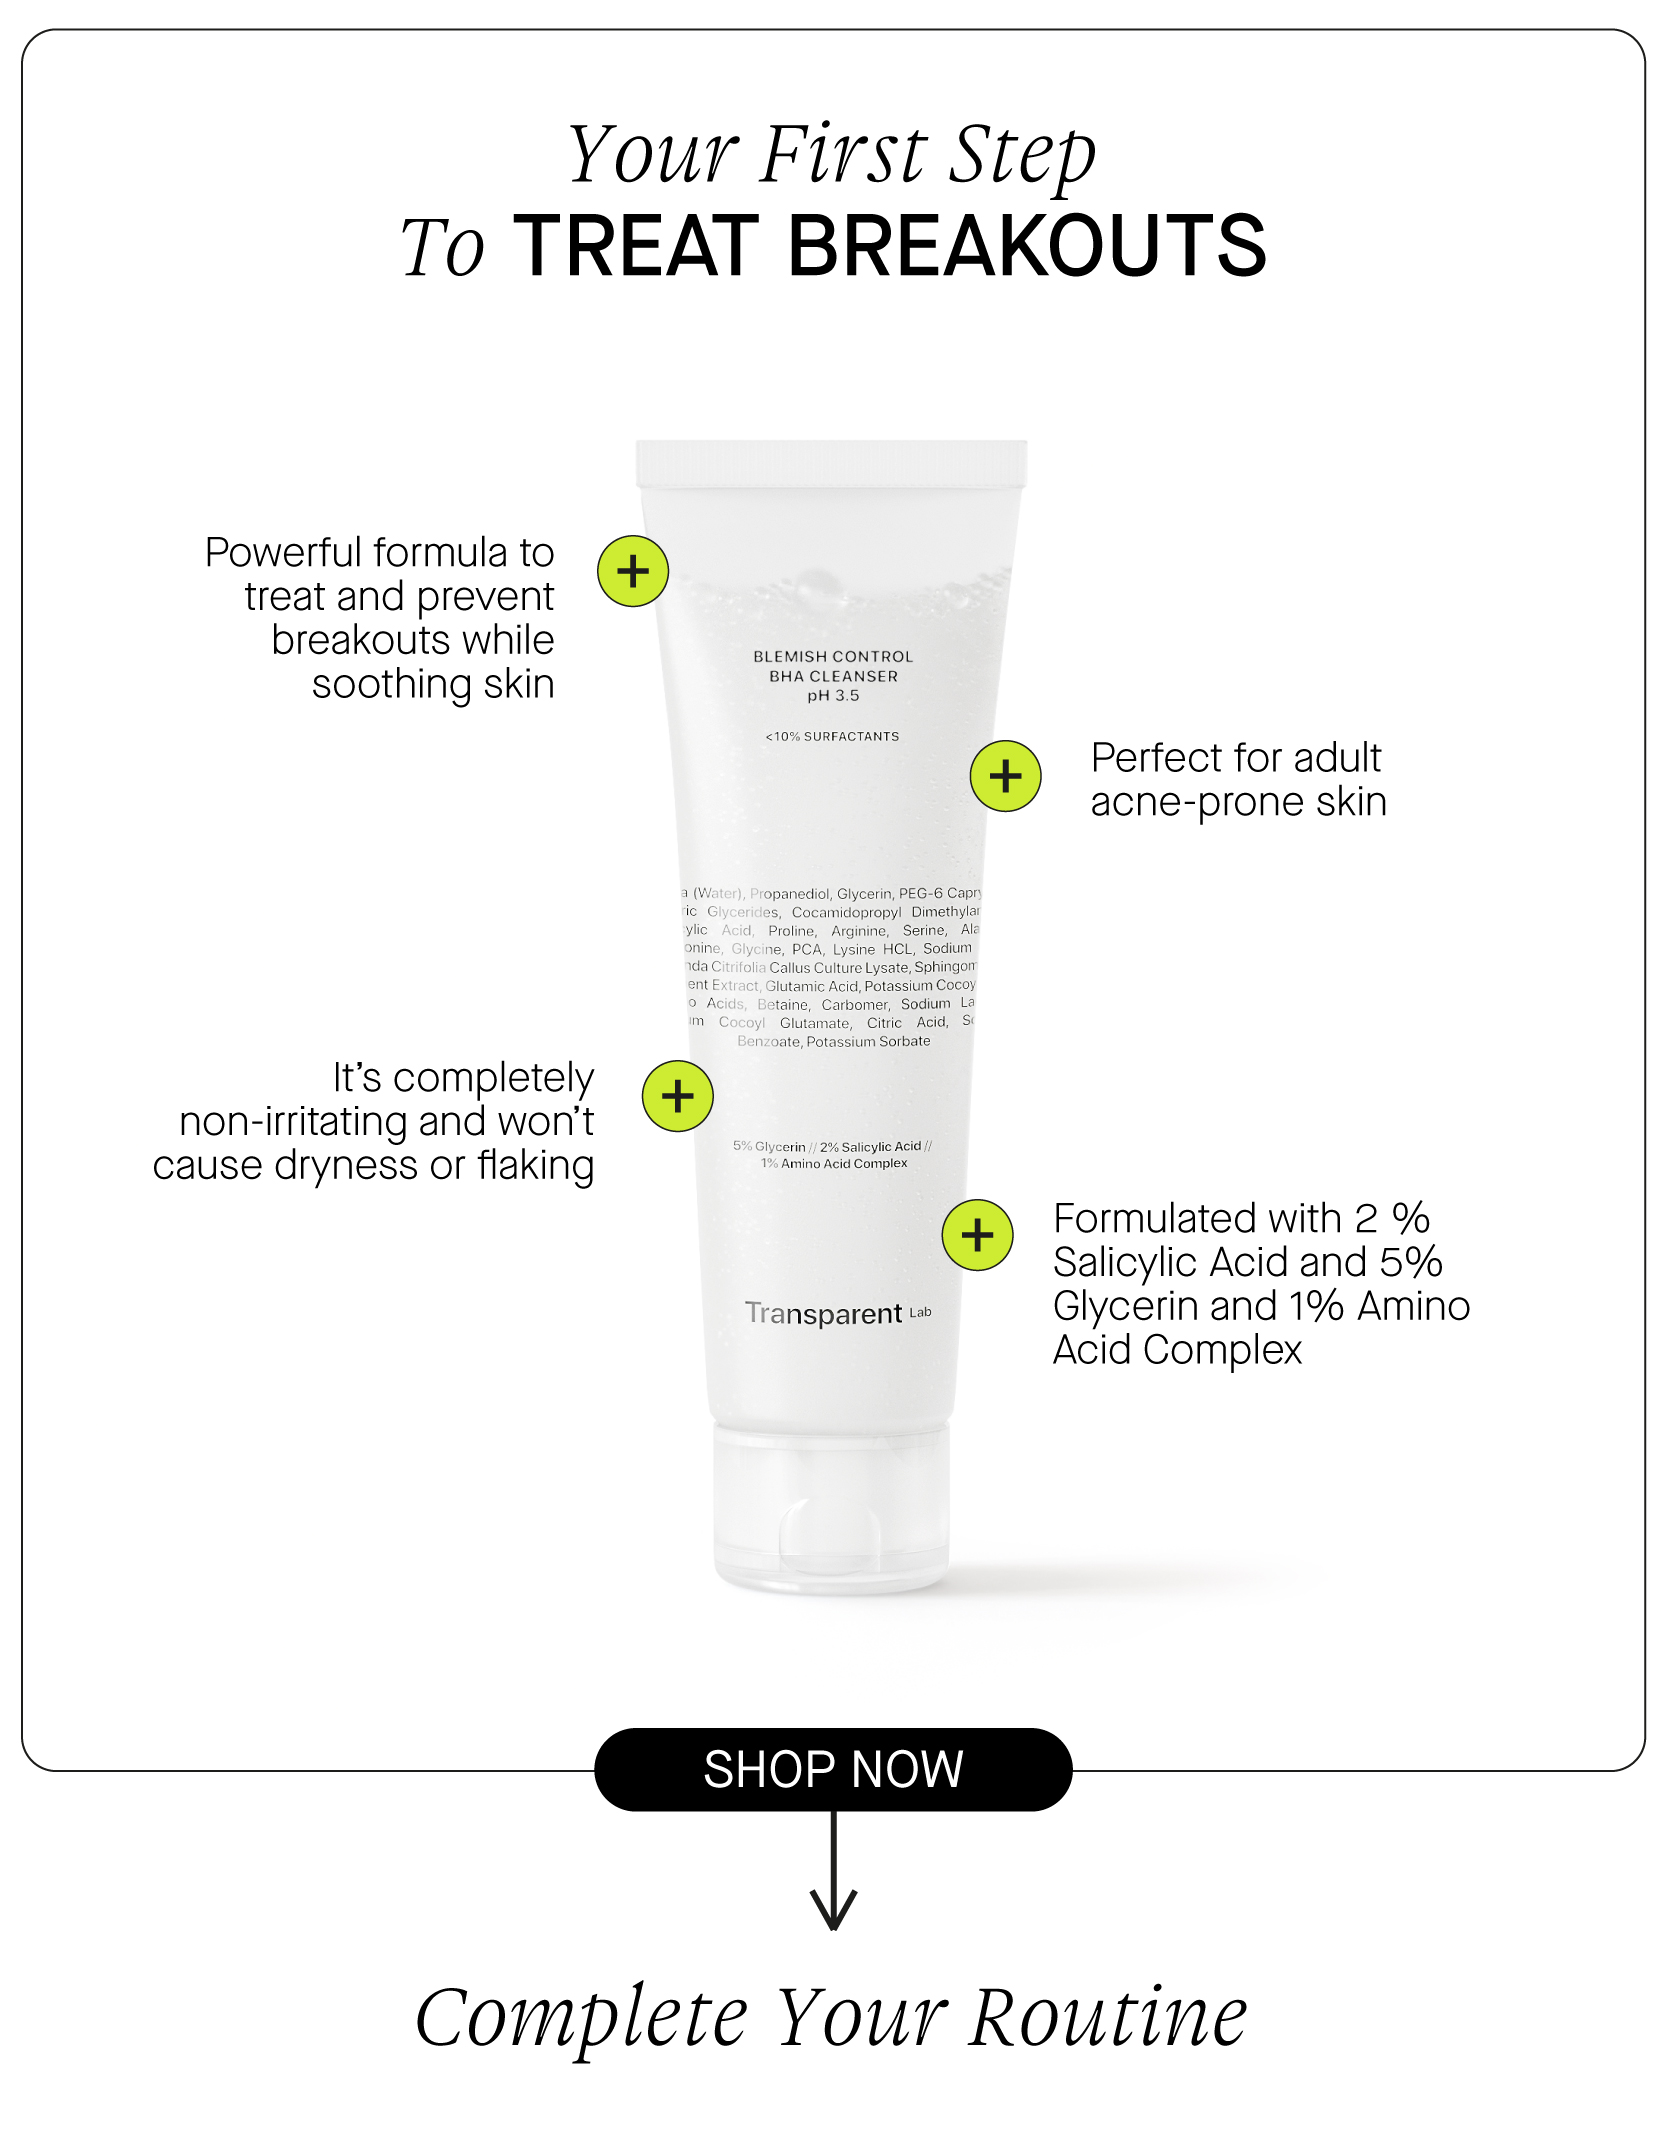  Your First Step To TREAT BREAKOUTS Powerful formula to treat and prevent breakouts while BHA CLEANSER soothing skin Perfect for adult acne-prone skin It's completely non-irritating and won't cause dryness or flaking Formulated with 2 % Salicylic Acid and 5% Transparent 1 Glycerin and 1% Amino Acid Complex Complere Your Routine 